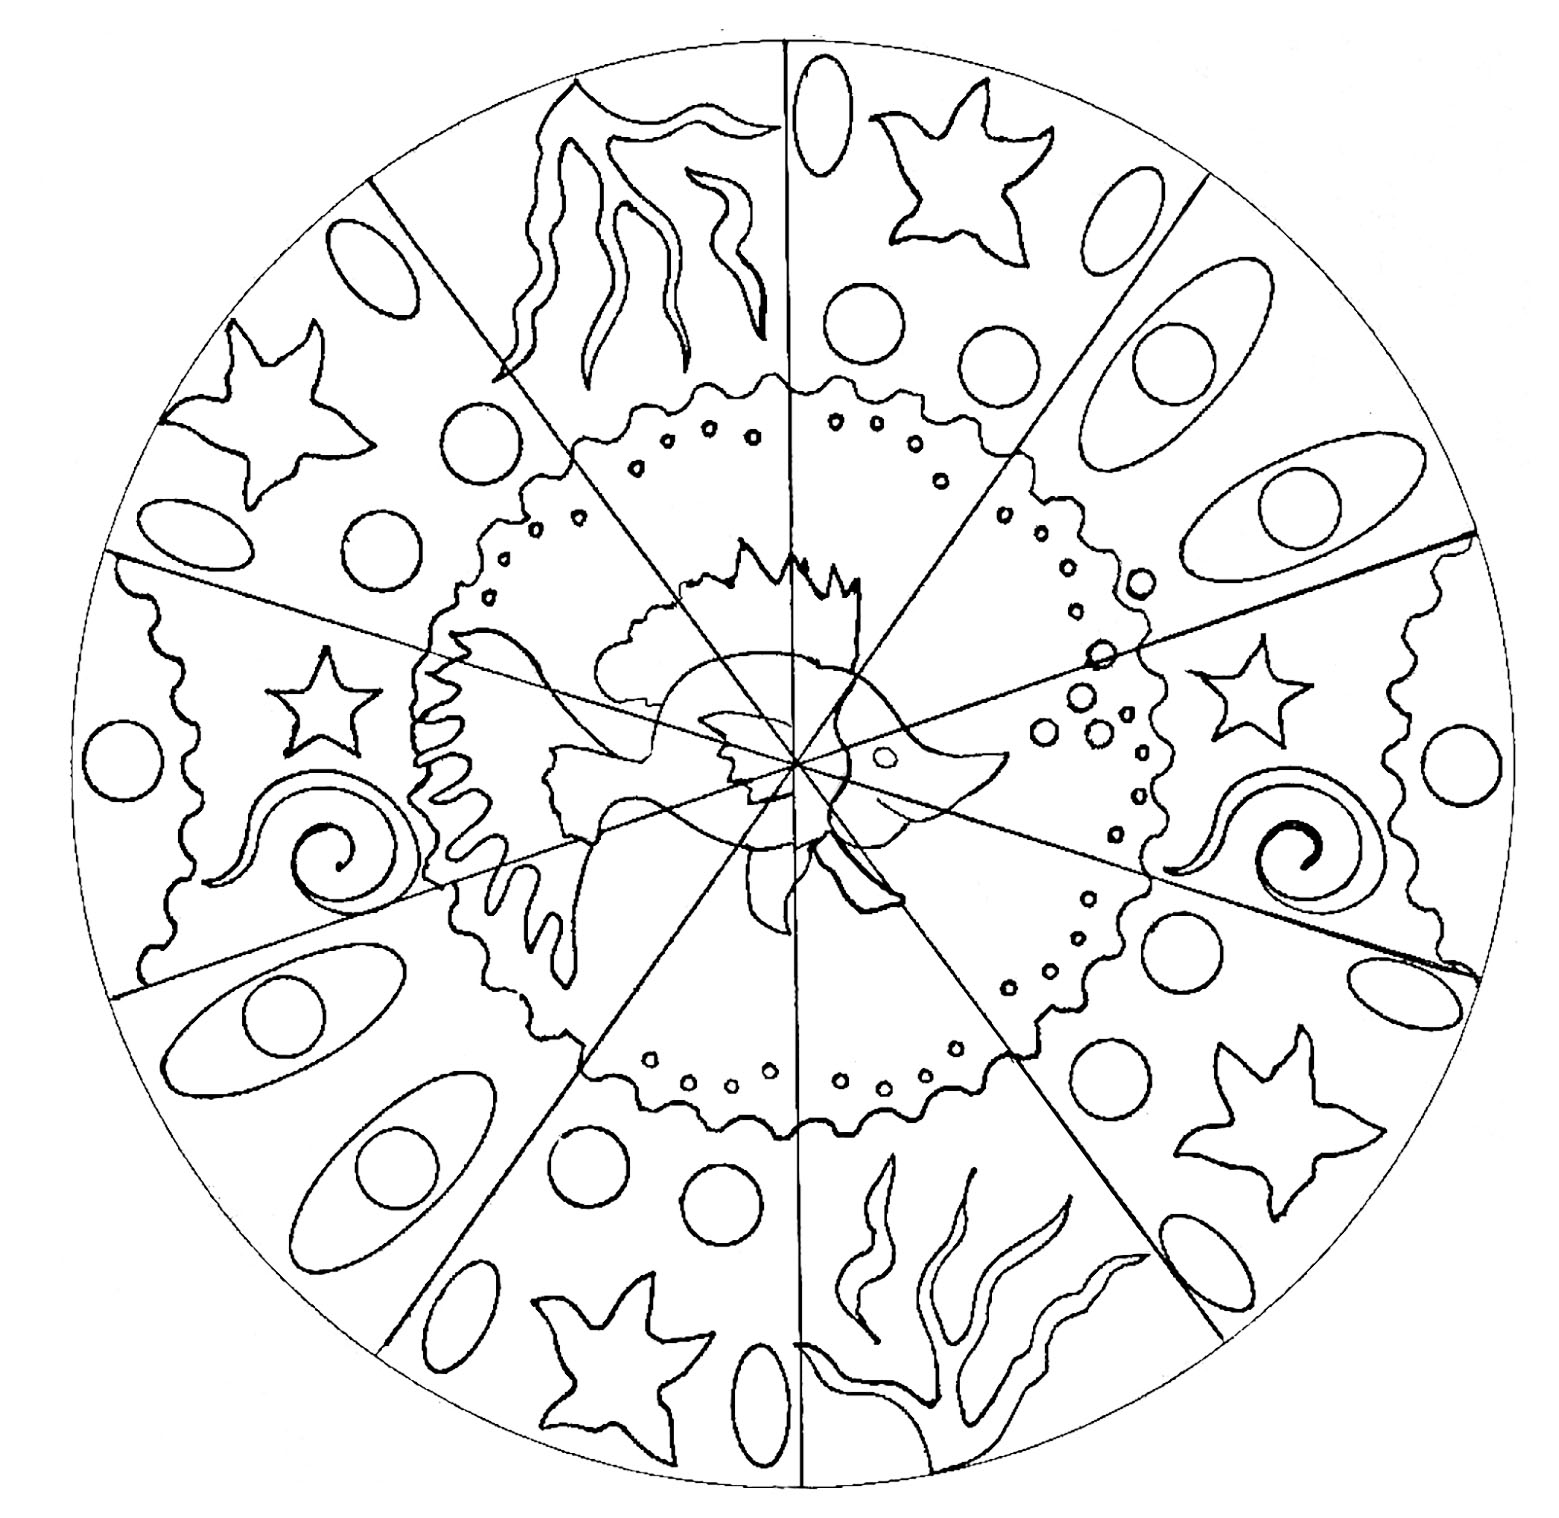 Just few details in this easy Mandala, which will suit kids and adults looking for not too complicated coloring pages. Completing a coloring sheet gives your kids a sense of accomplishment, which builds their self esteem and confidence.